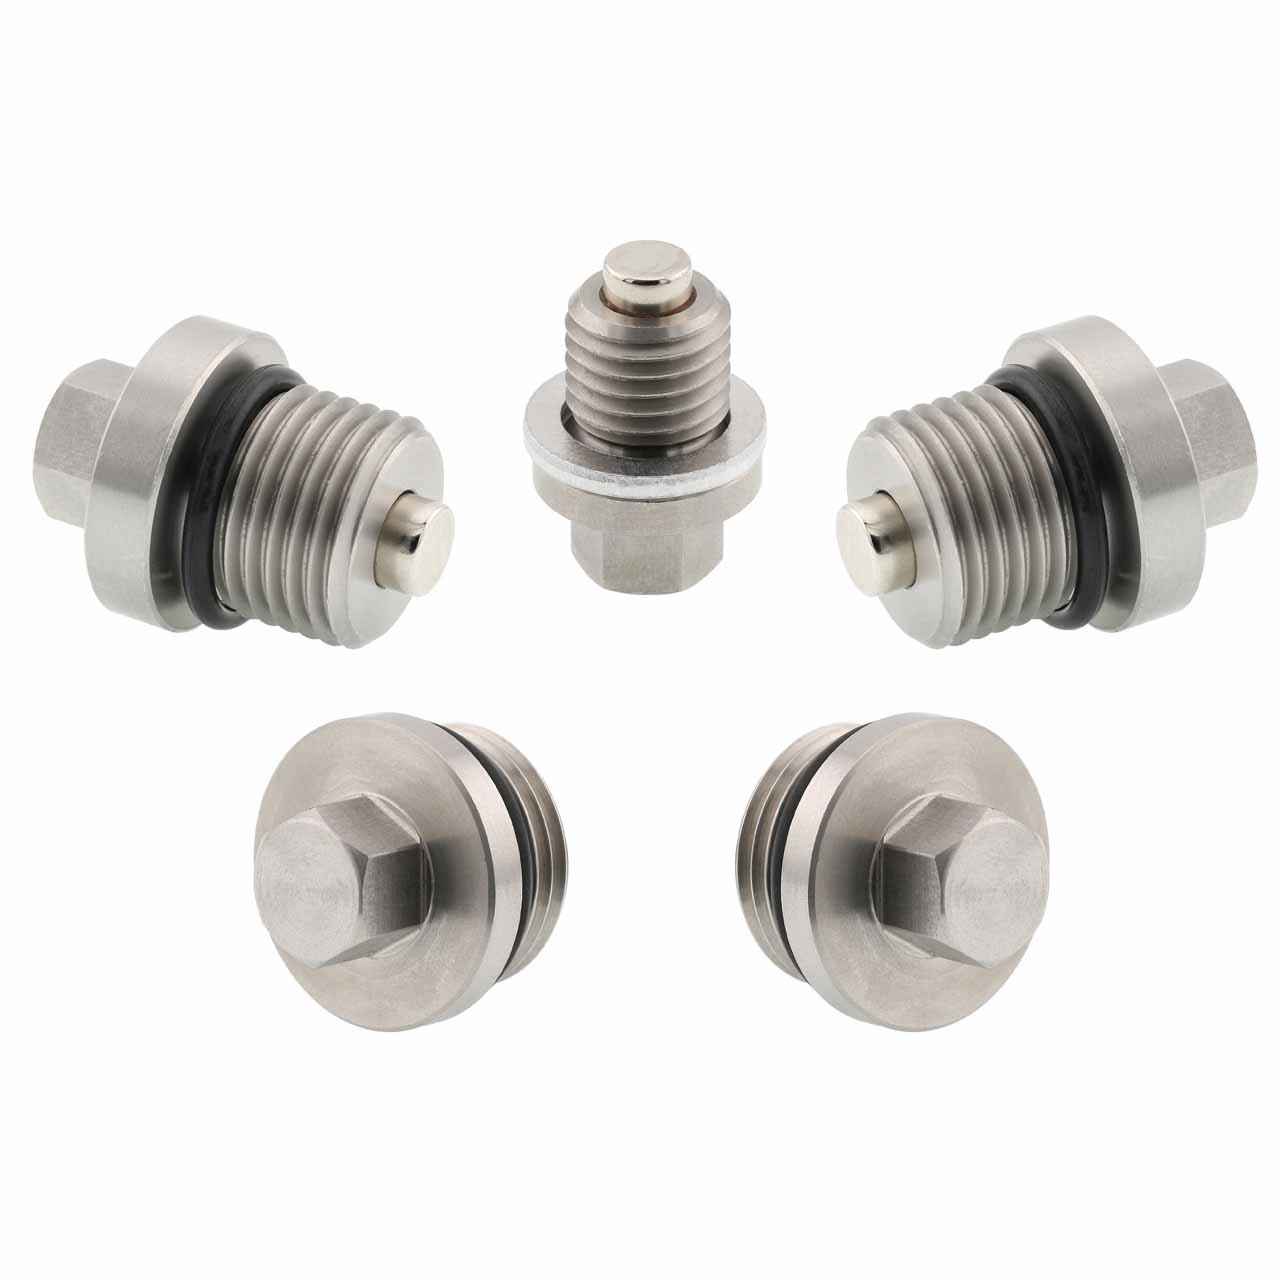 Polaris Ranger RZR 800 S Magnetic Oil Drain Plug Kit - 2010-2013 - Engine, Transmission, Differential - Made In USA